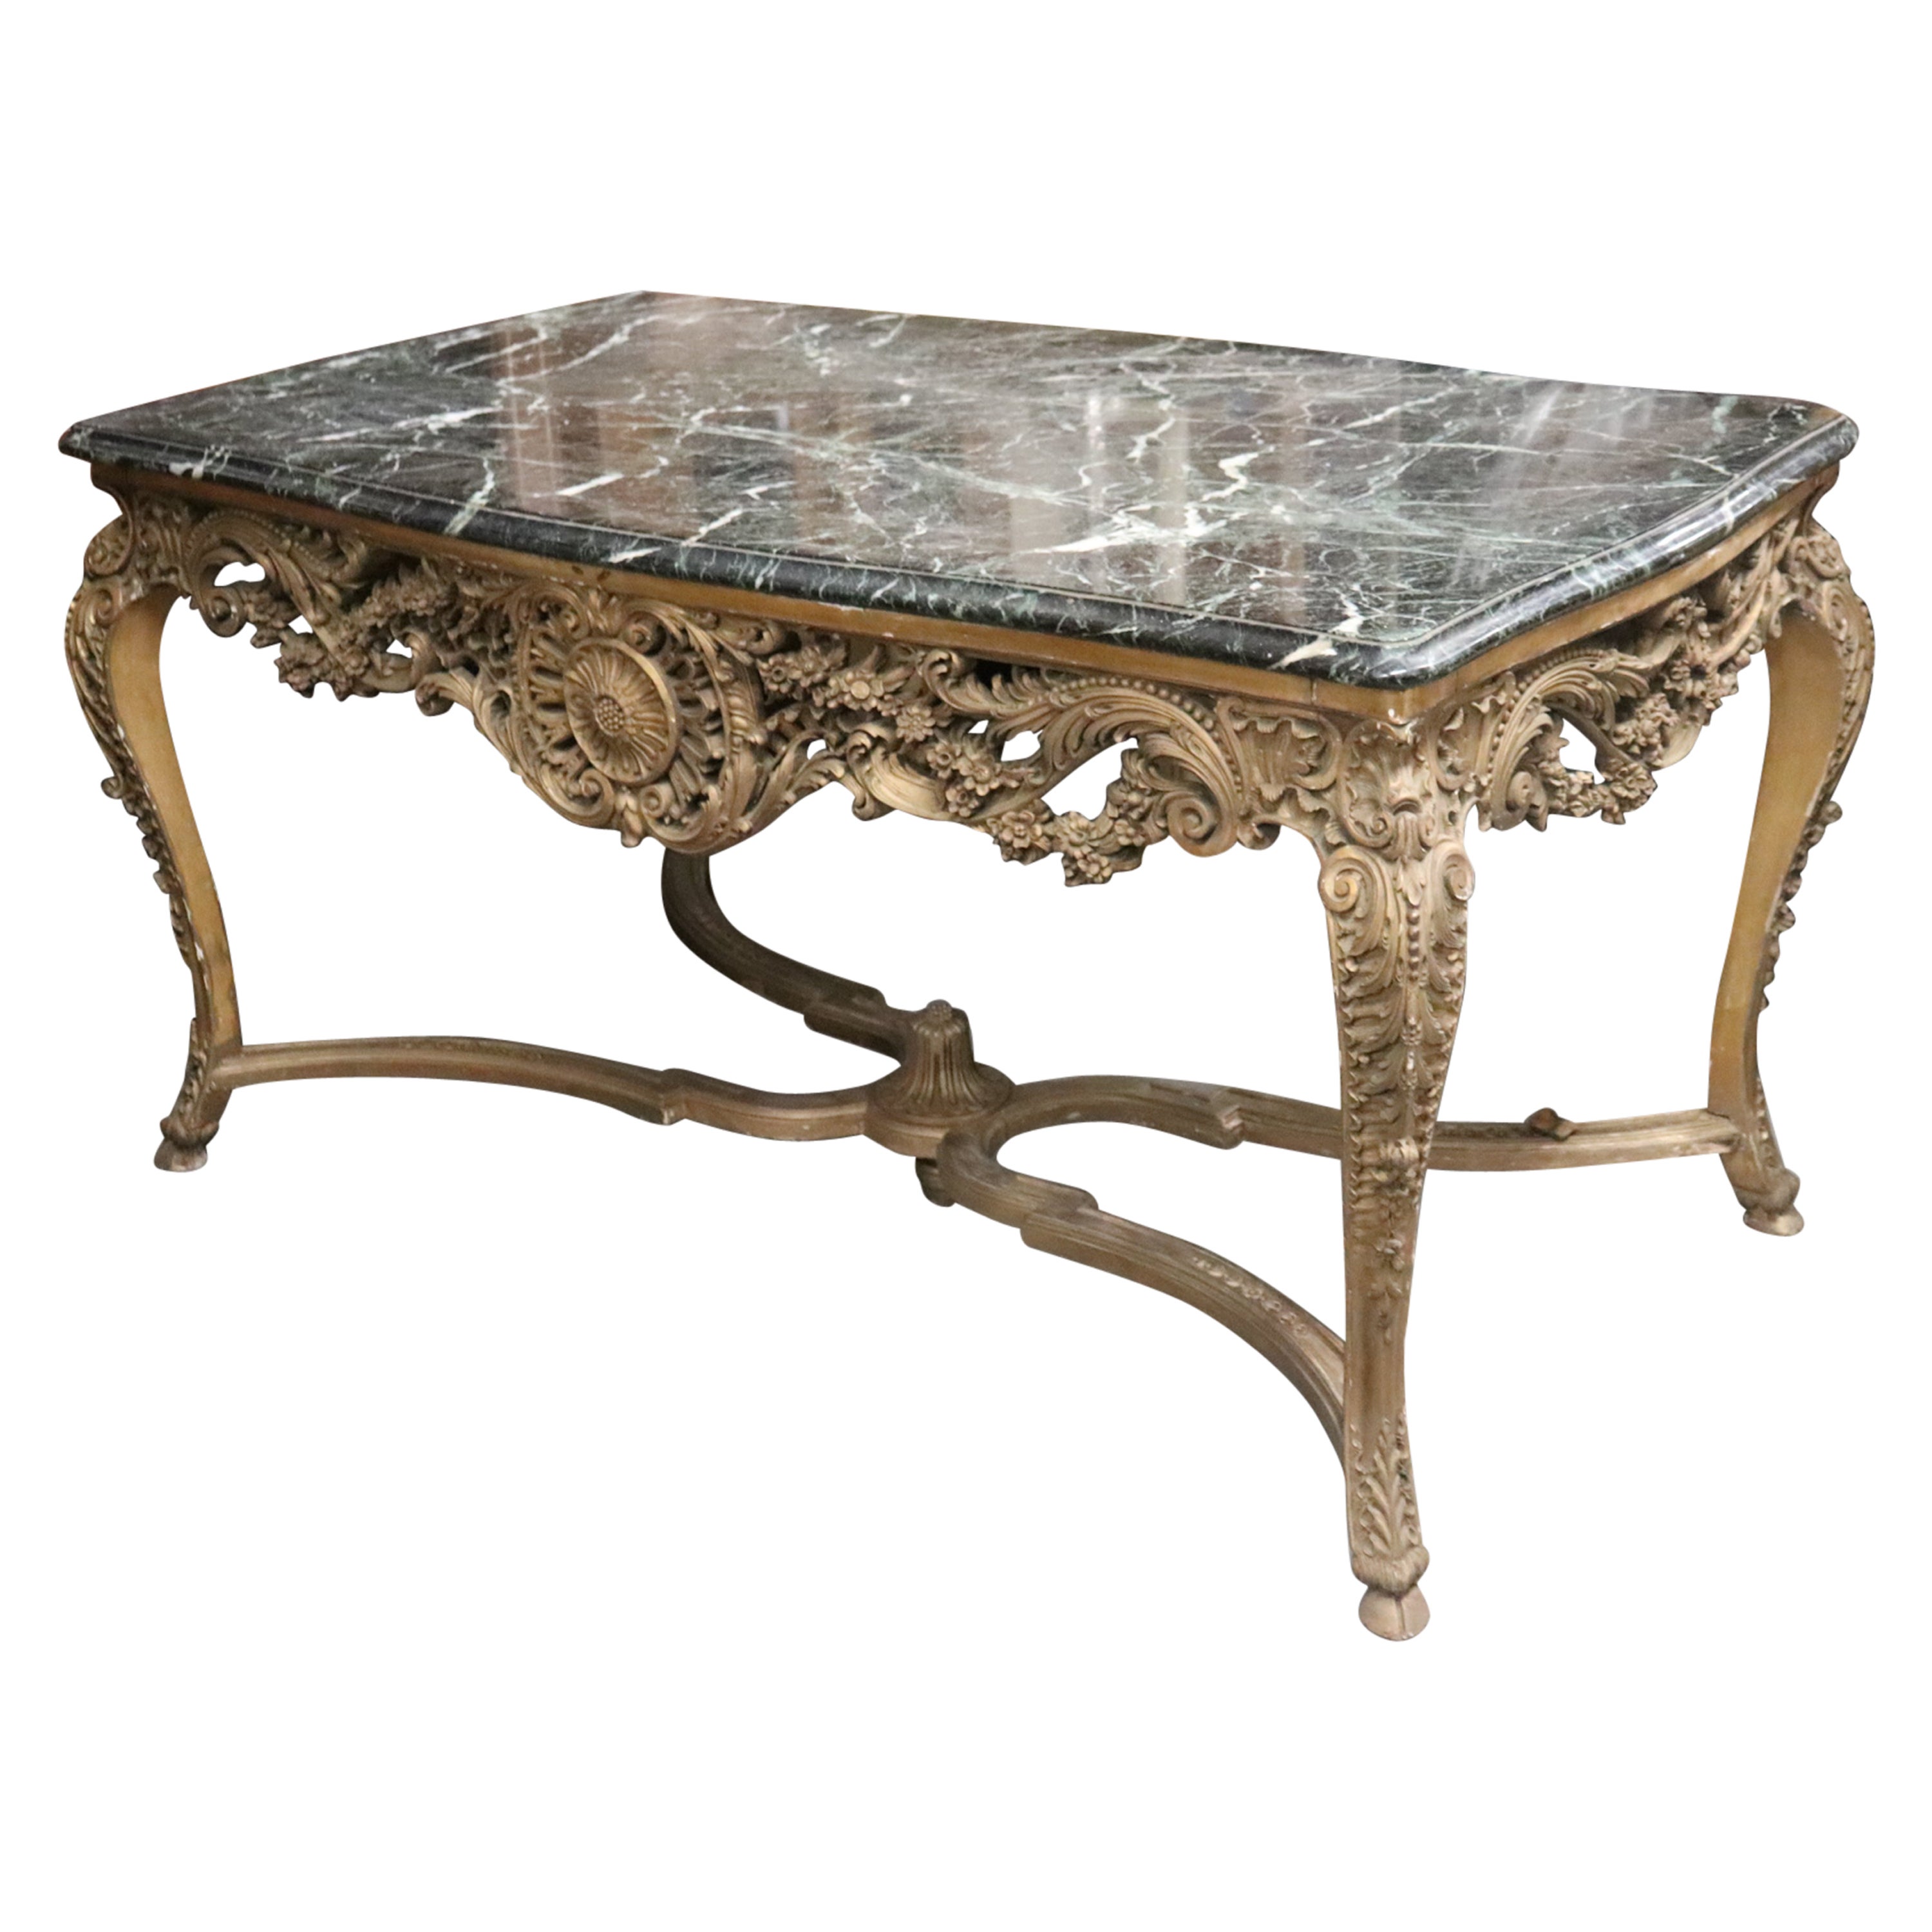 Finely Carved Gilded French Verdi Green Marble Louis XV Center Table circa 1890s